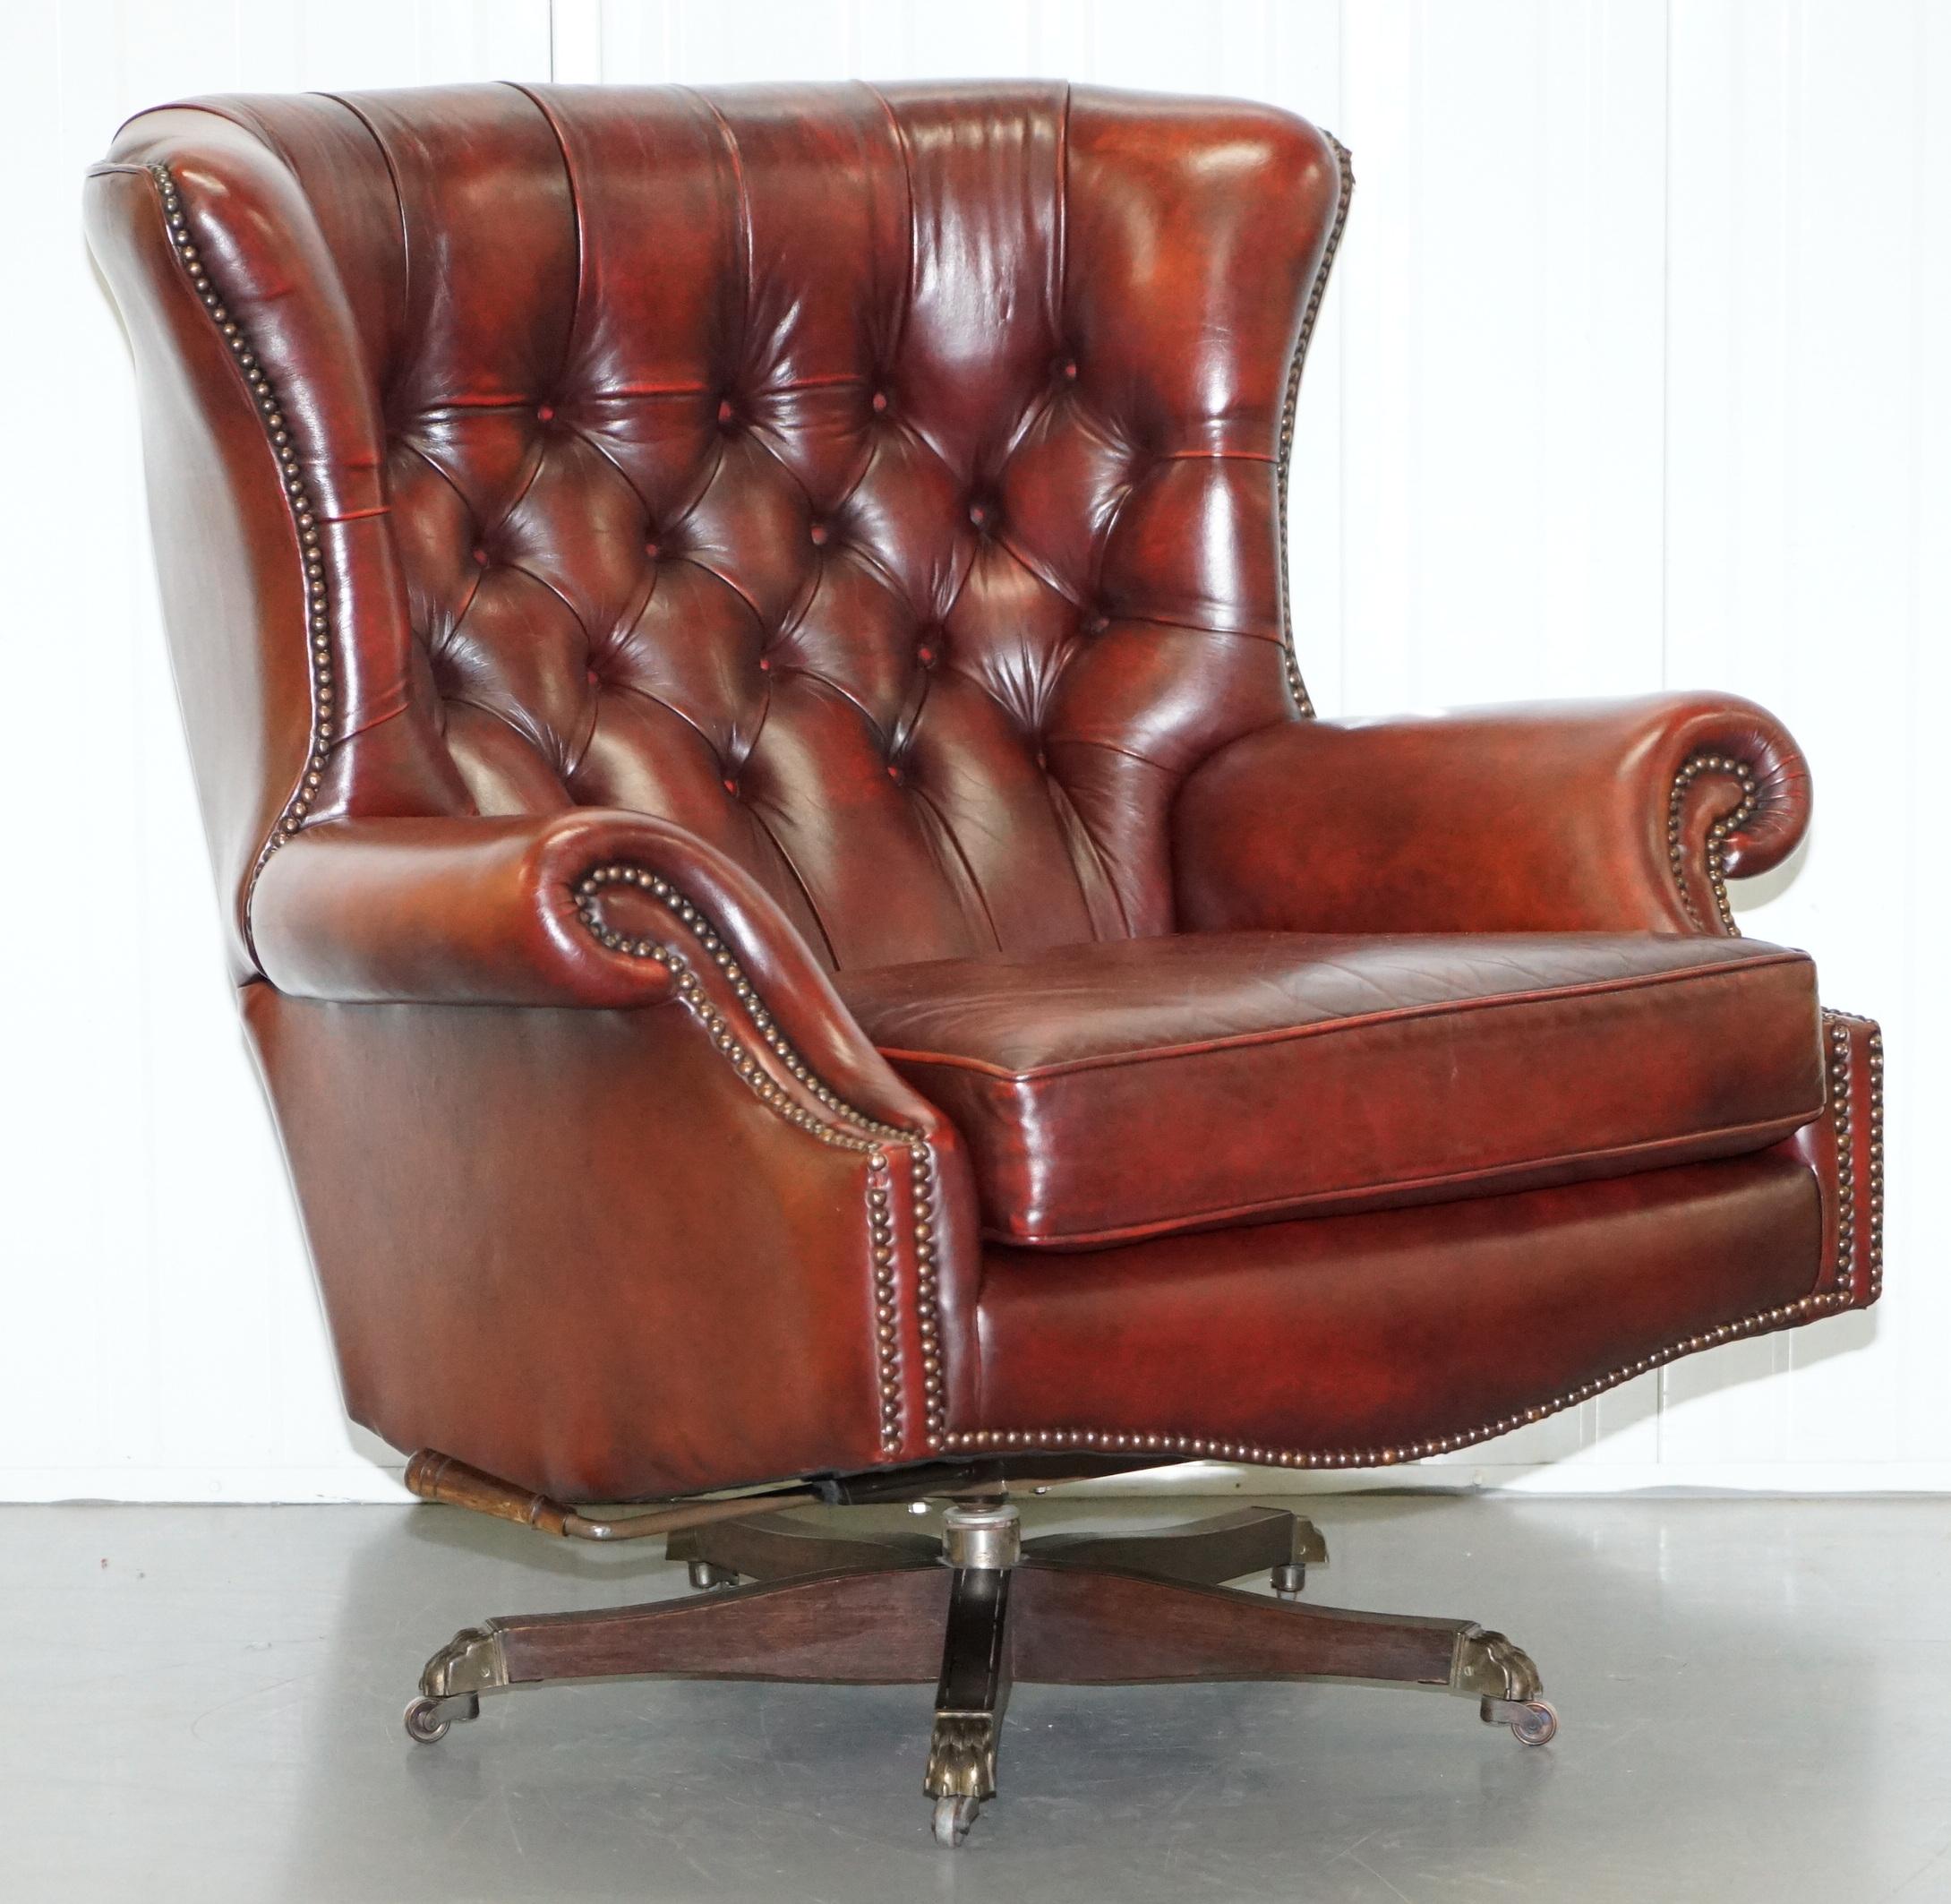 We are delighted to this stunning 1 of 2 Art Forma for Harrods London hand dyed oxblood leather oversized wingback library reading lounge chair with matching ottoman 

I have another one of these armchairs listed under my other items that is